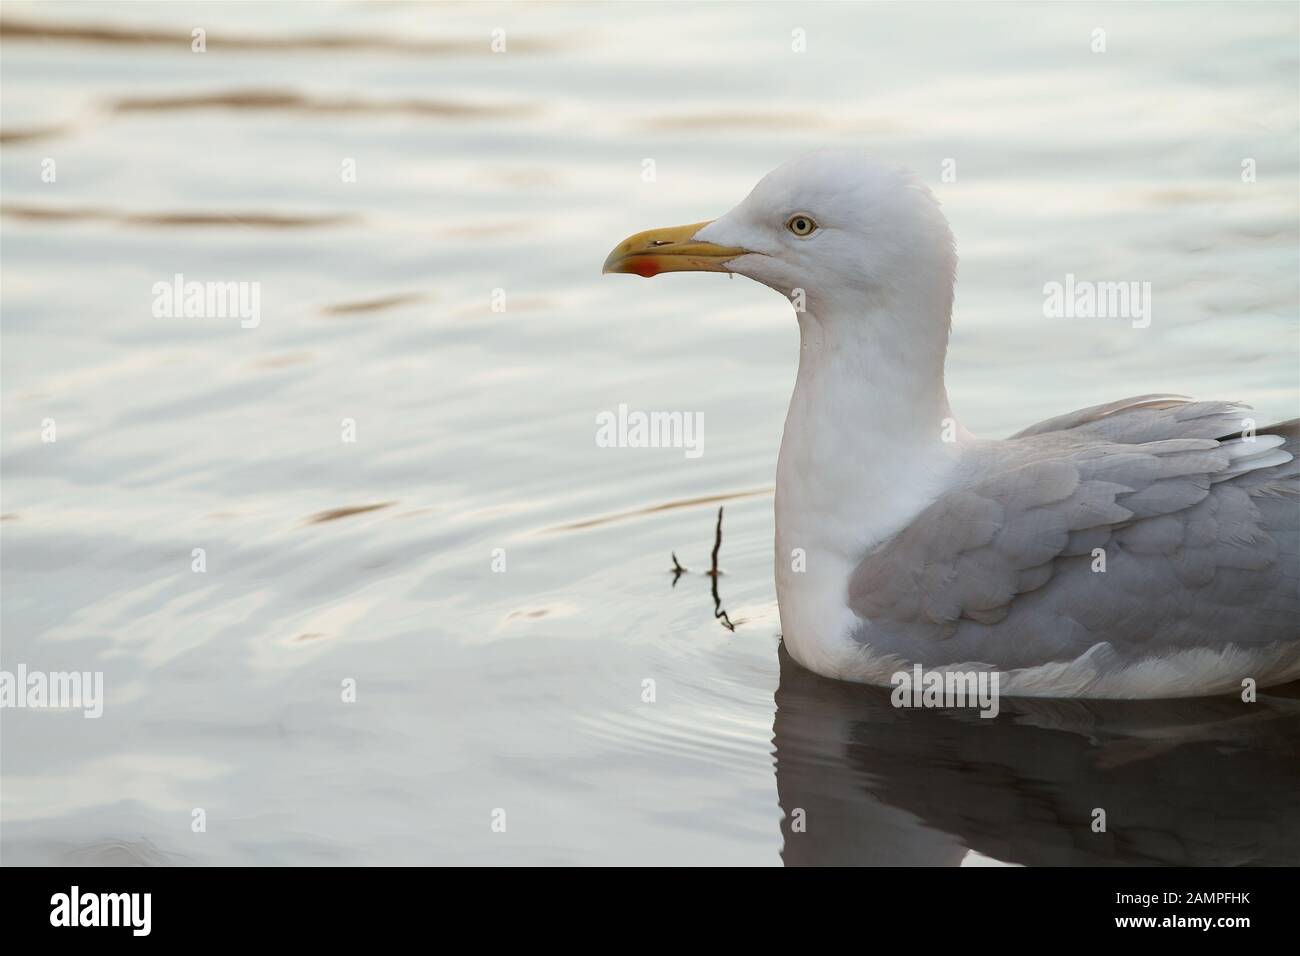 A seagull floating on calm water. Stock Photo